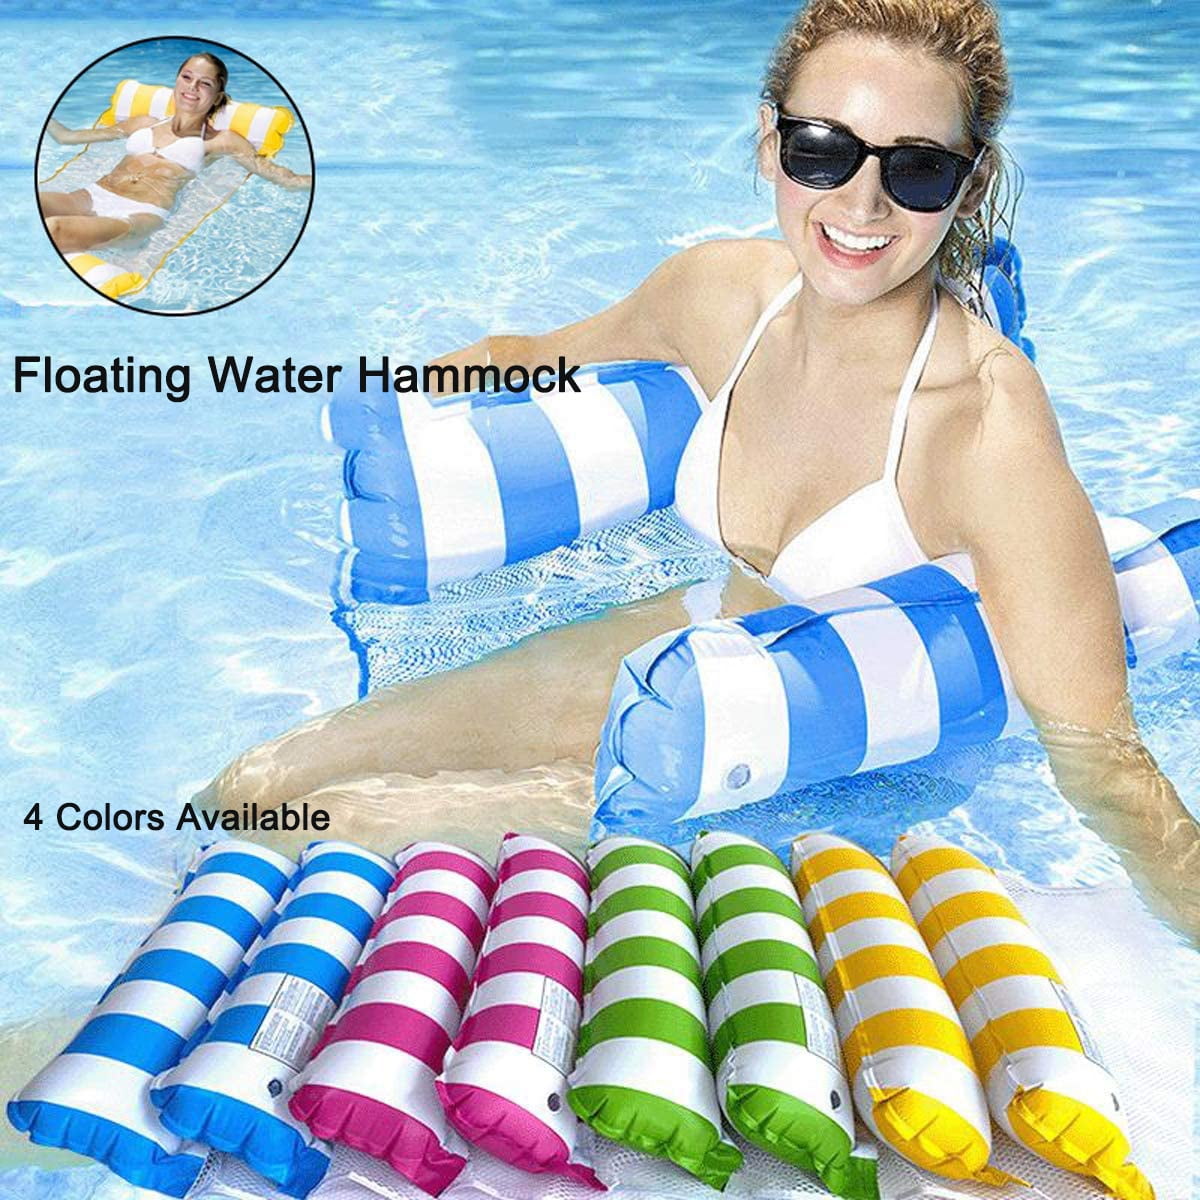 Inflatable Floating Water Hammock Float Pool Lounge Swim Chair with Pump bro 